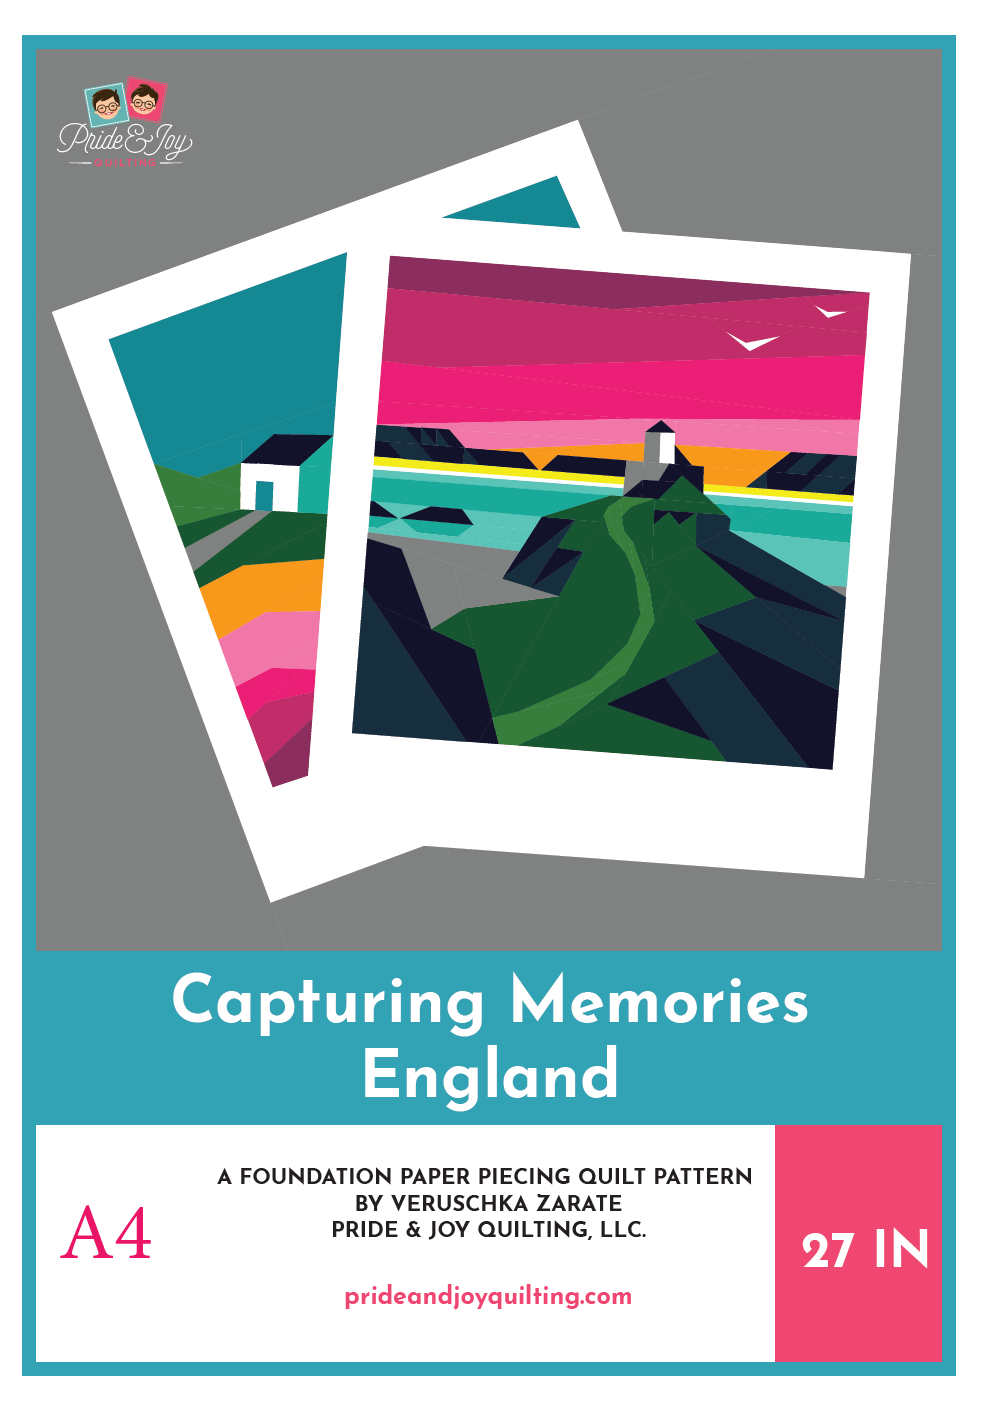 PDF (Part 4 of 9) (A4 Paper) Capturing Memories ENGLAND, A Foundation Paper Piecing Quilt Pattern Series